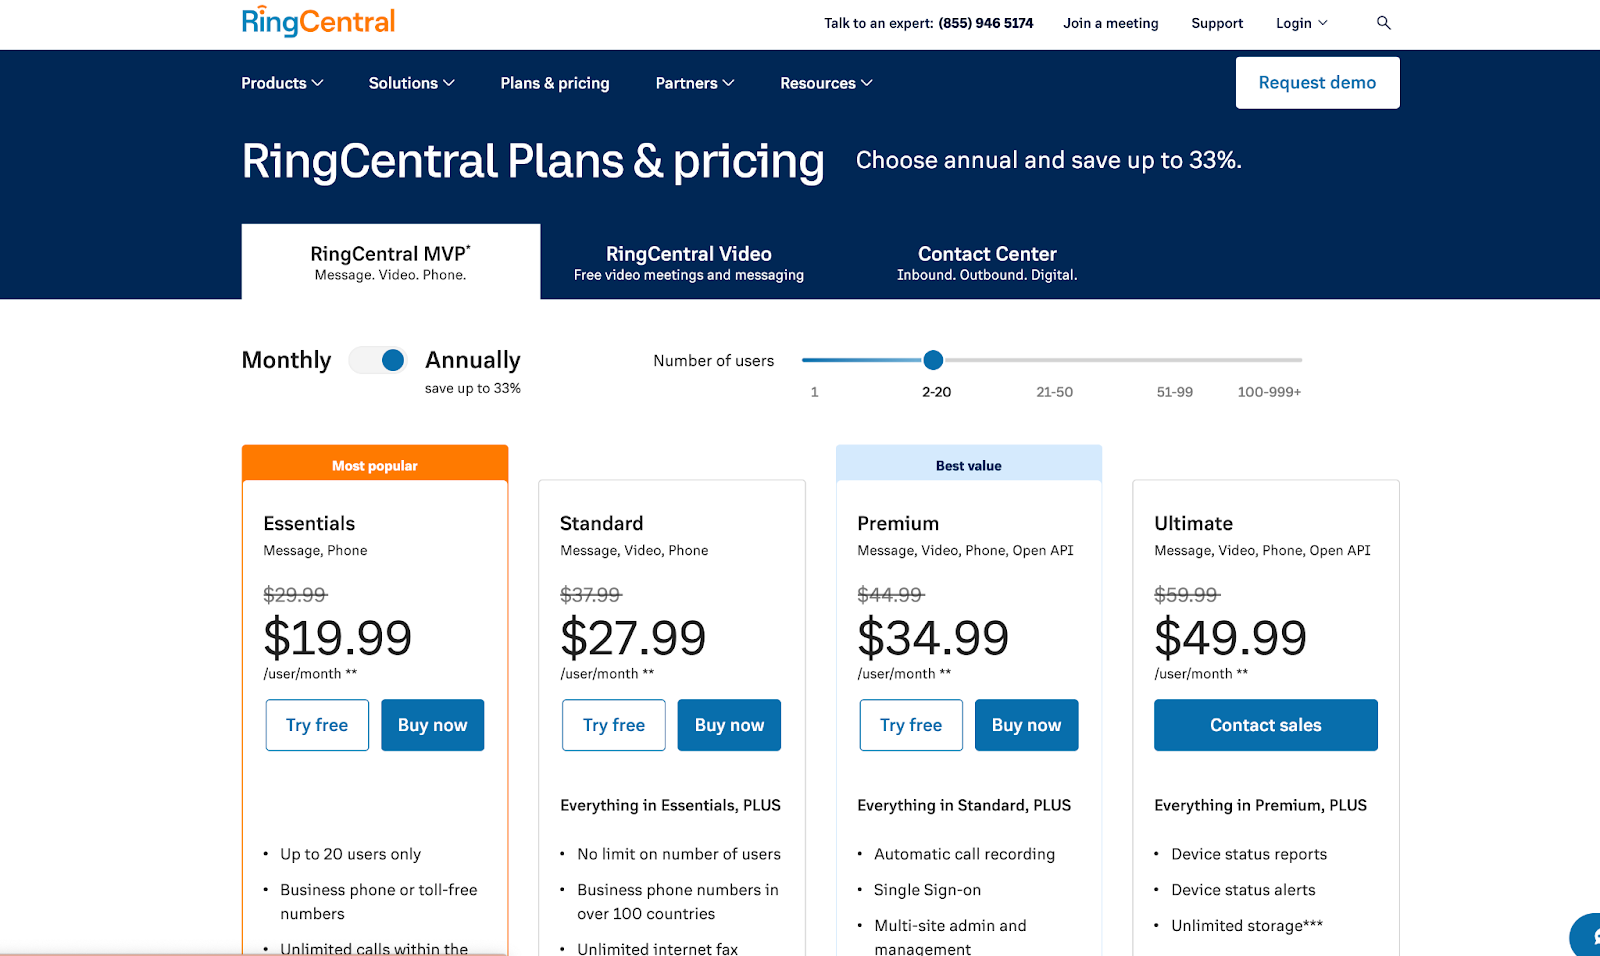 Call Center Software - RingCentral pricing.